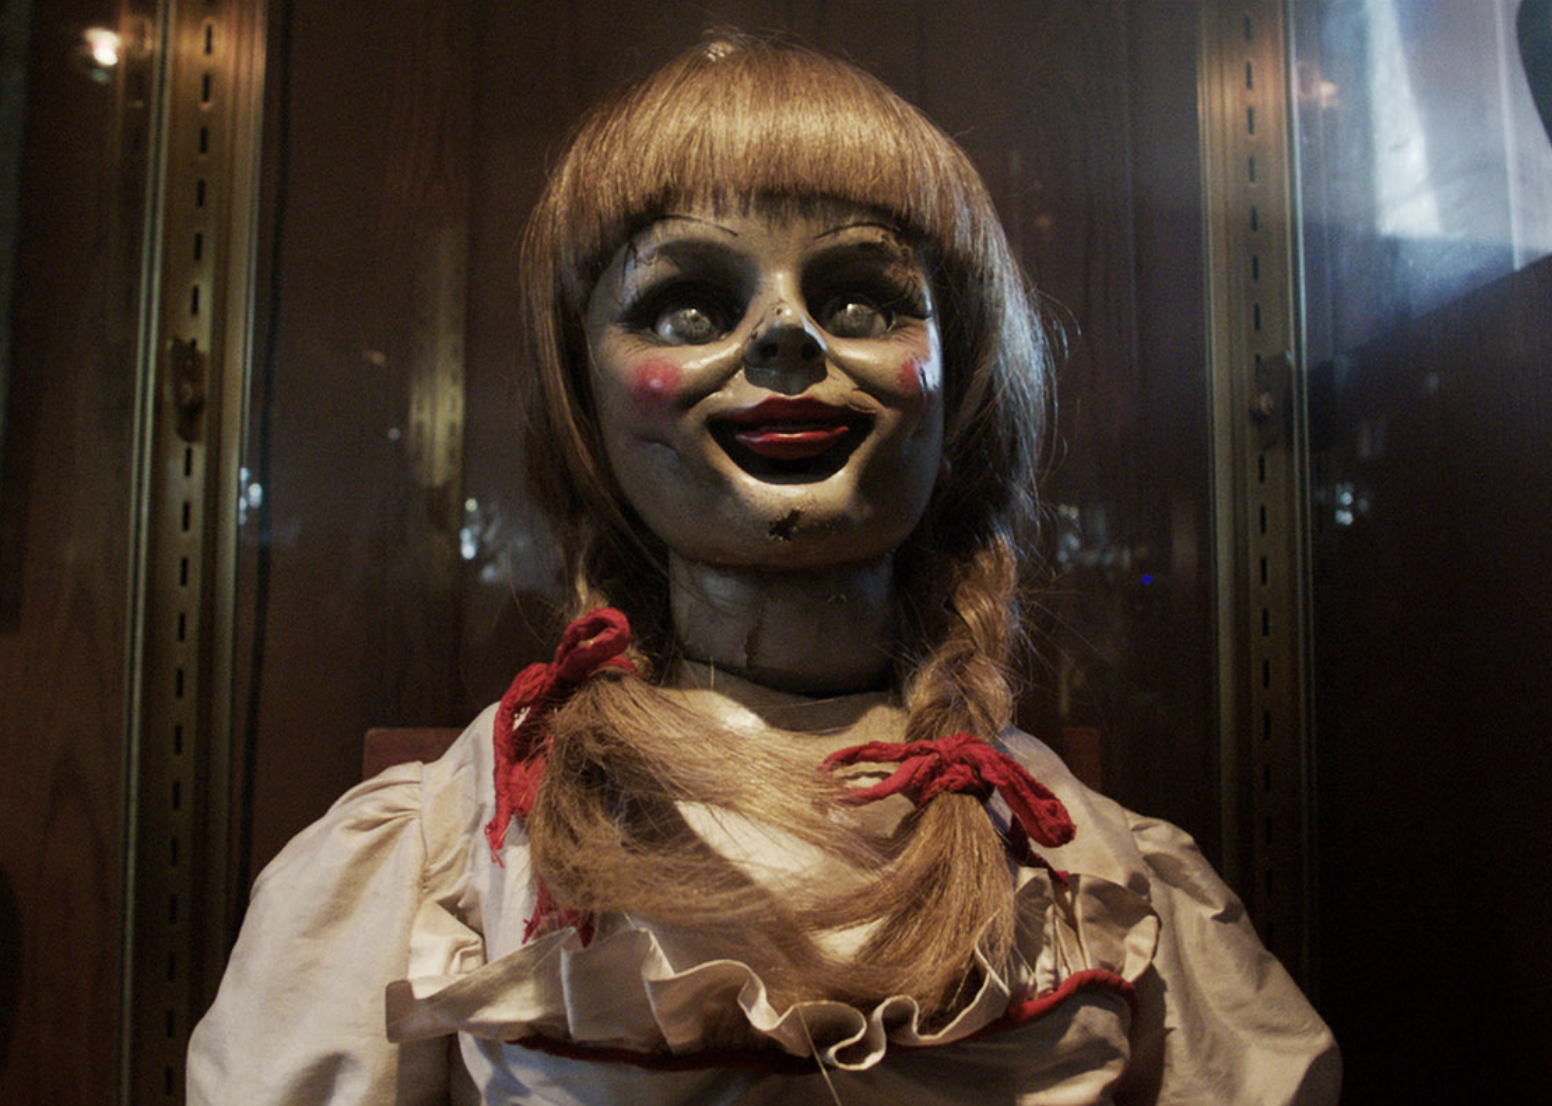 The doll from "The Conjuring"